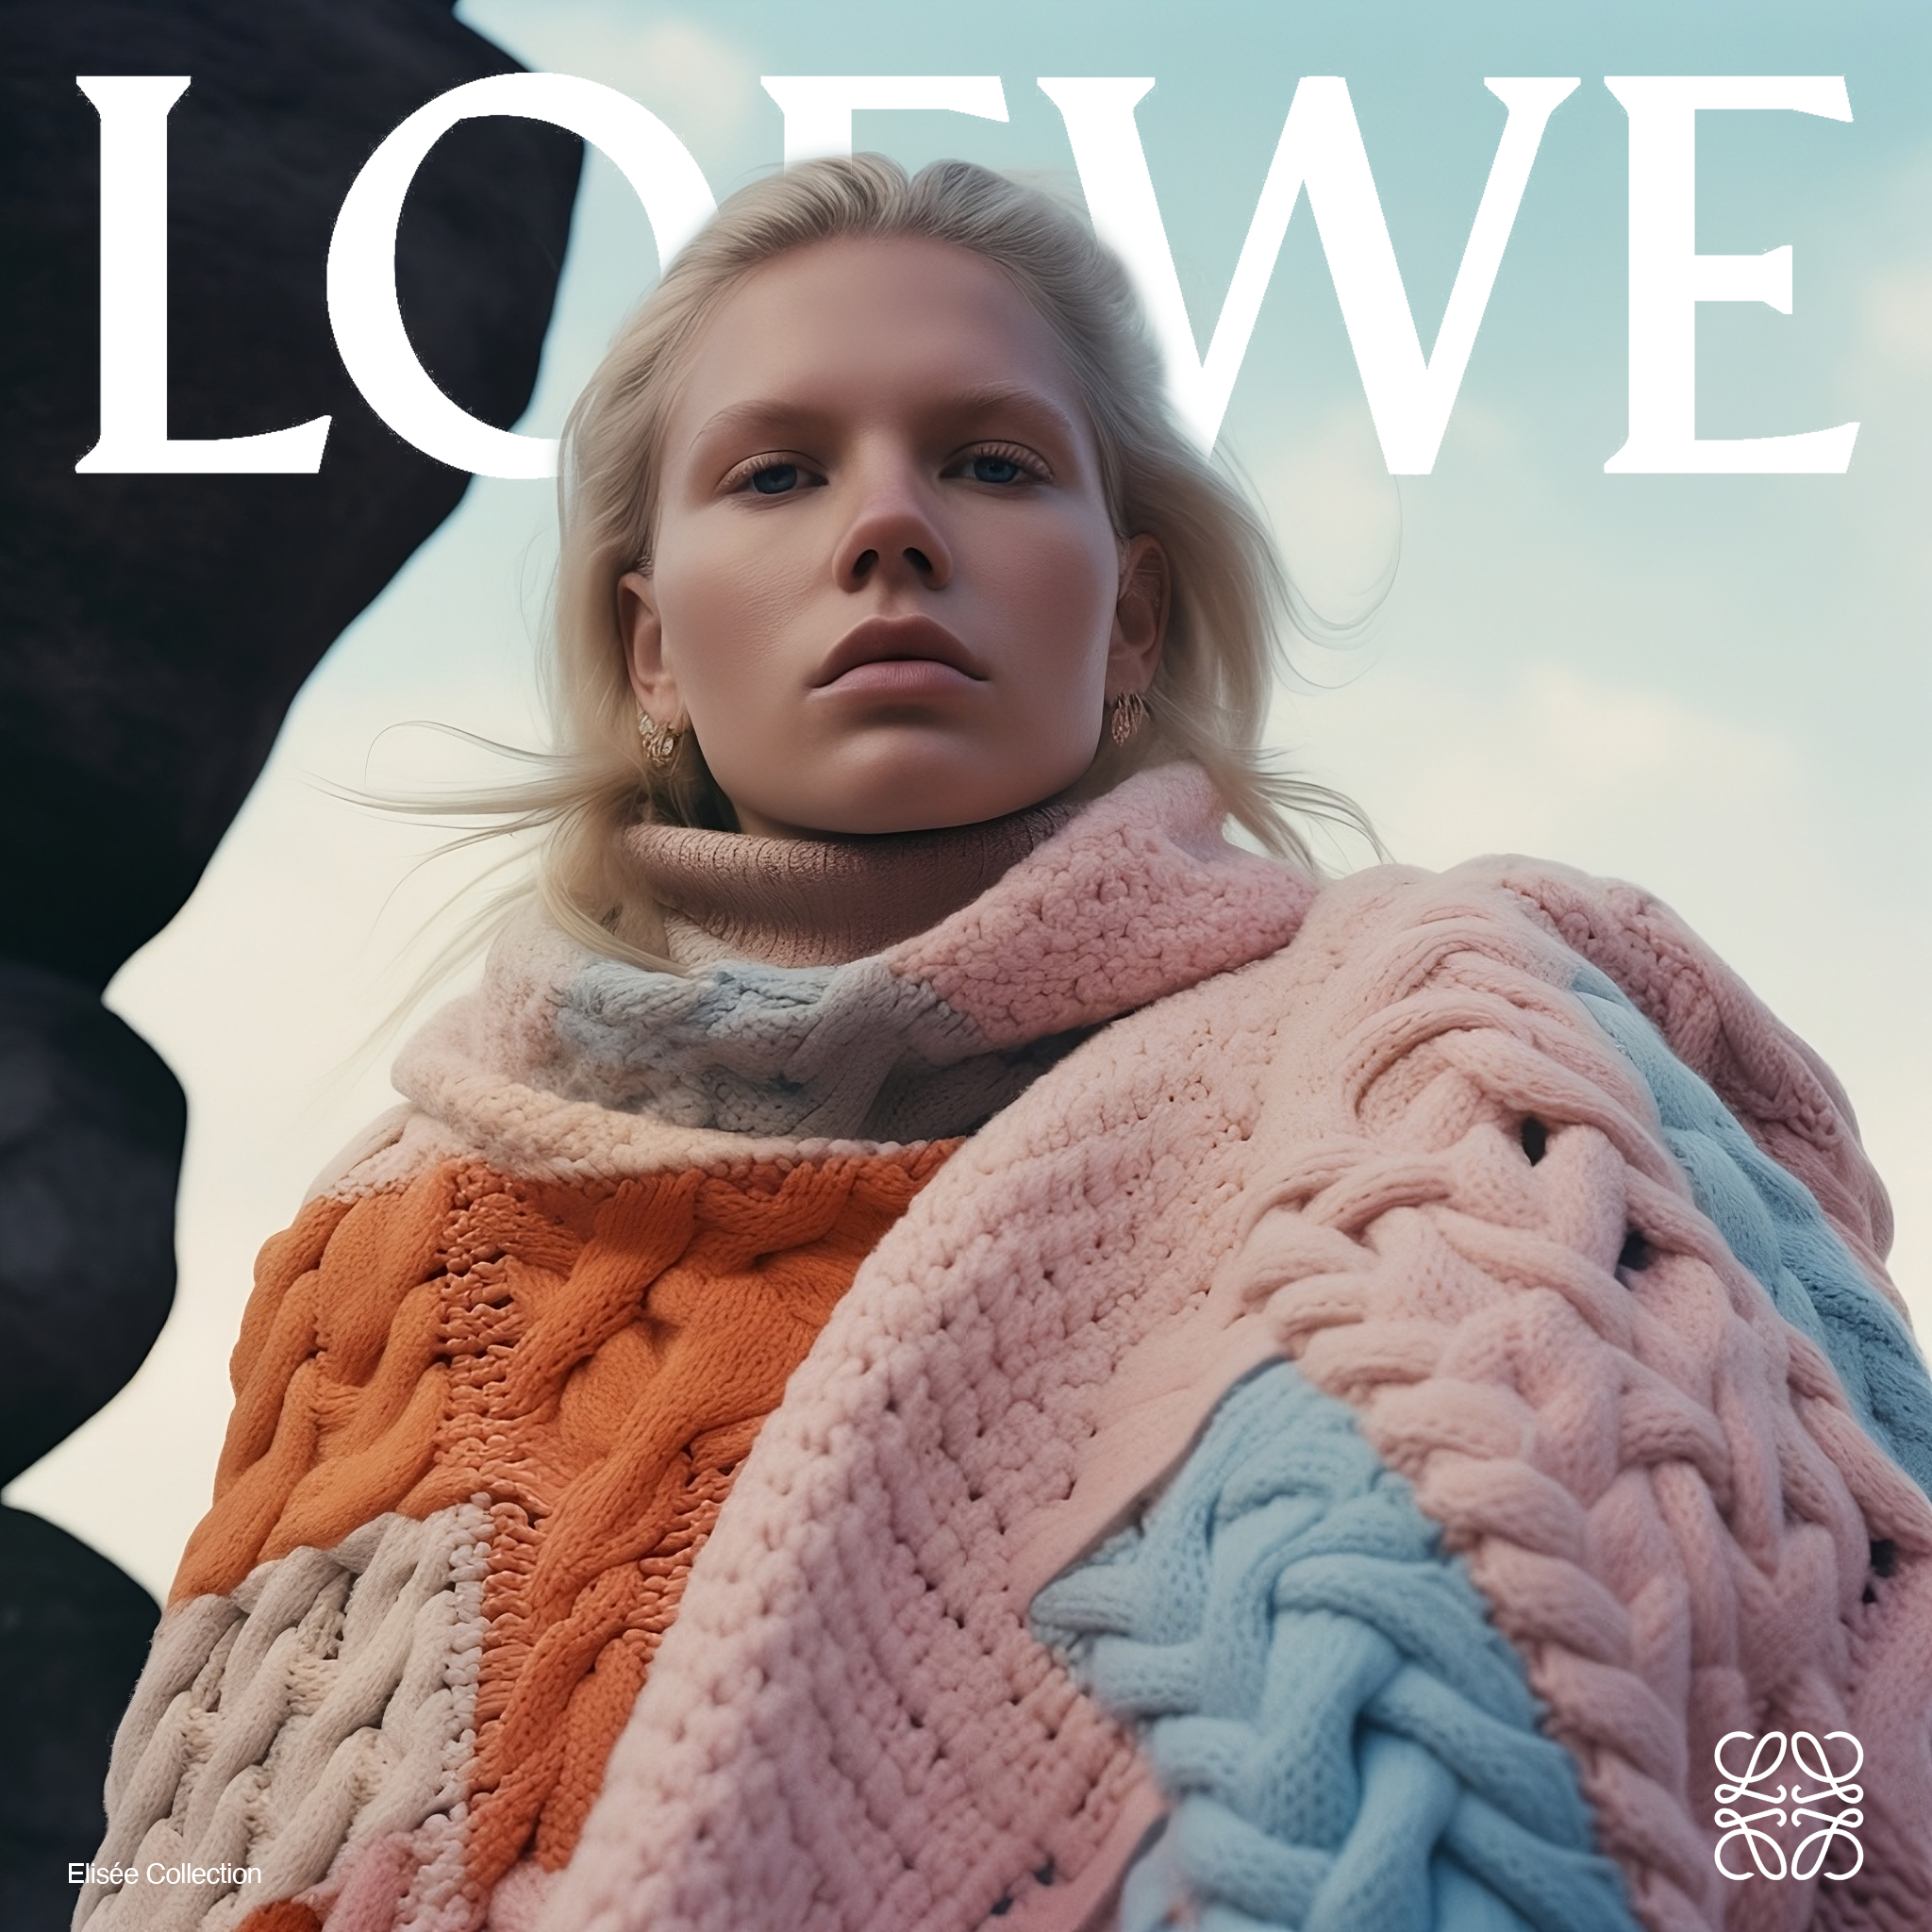 KJ_a_Loewe_winter_knitwear_oversized_scarf_light_colors_highly__9a74d856-a5fc-4bc9-864c-9450389ddb72-transformed